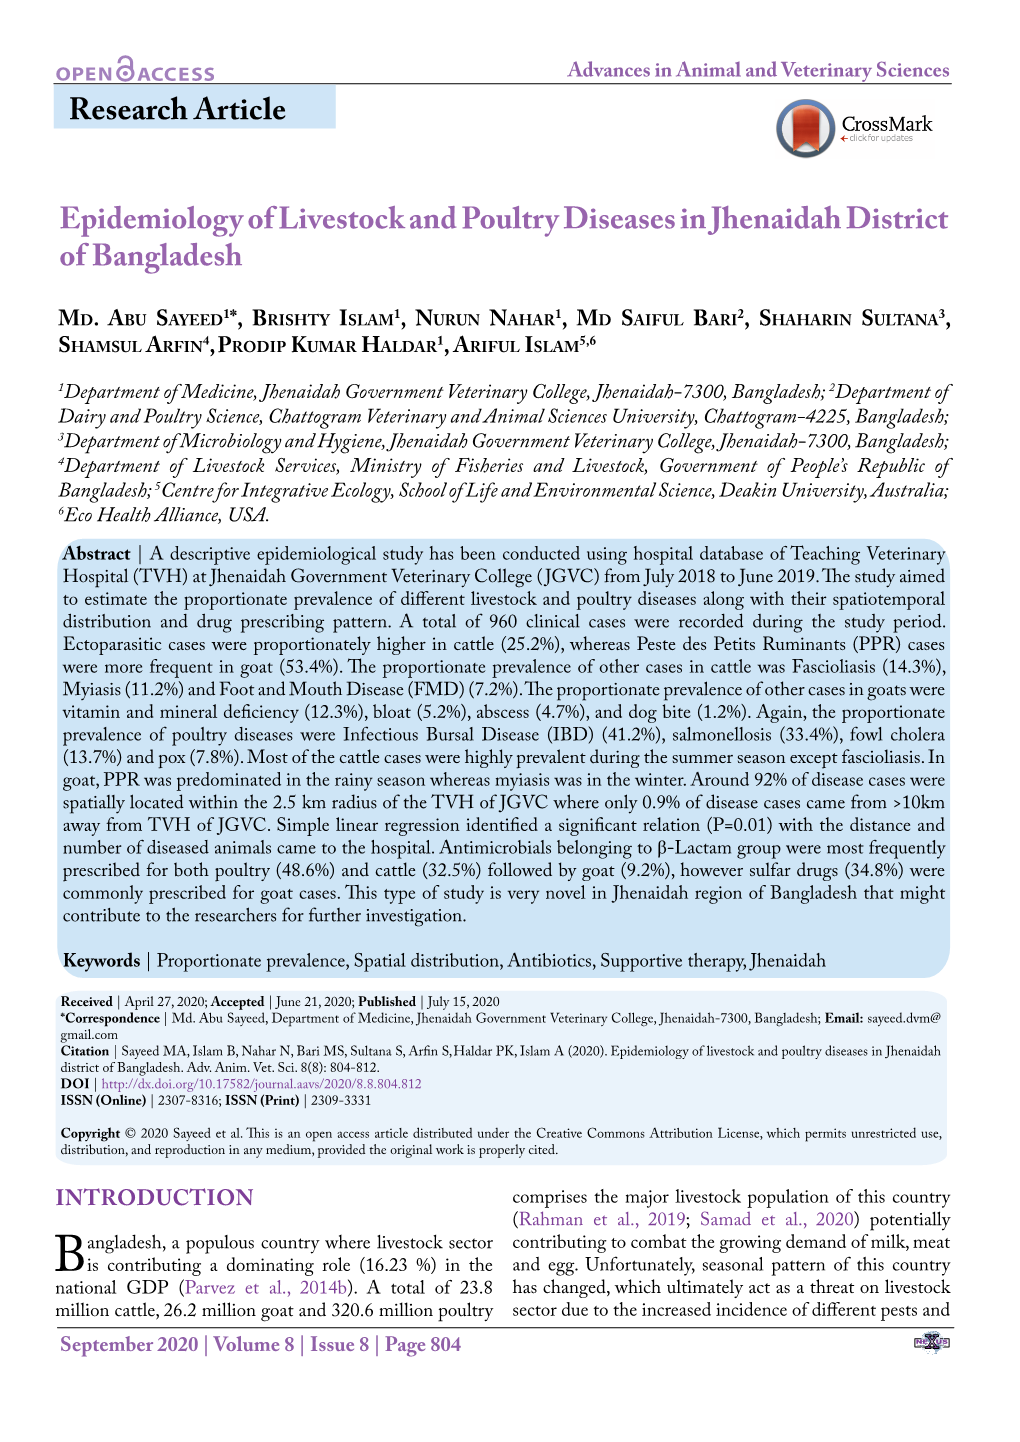 Epidemiology of Livestock and Poultry Diseases in Jhenaidah District of Bangladesh